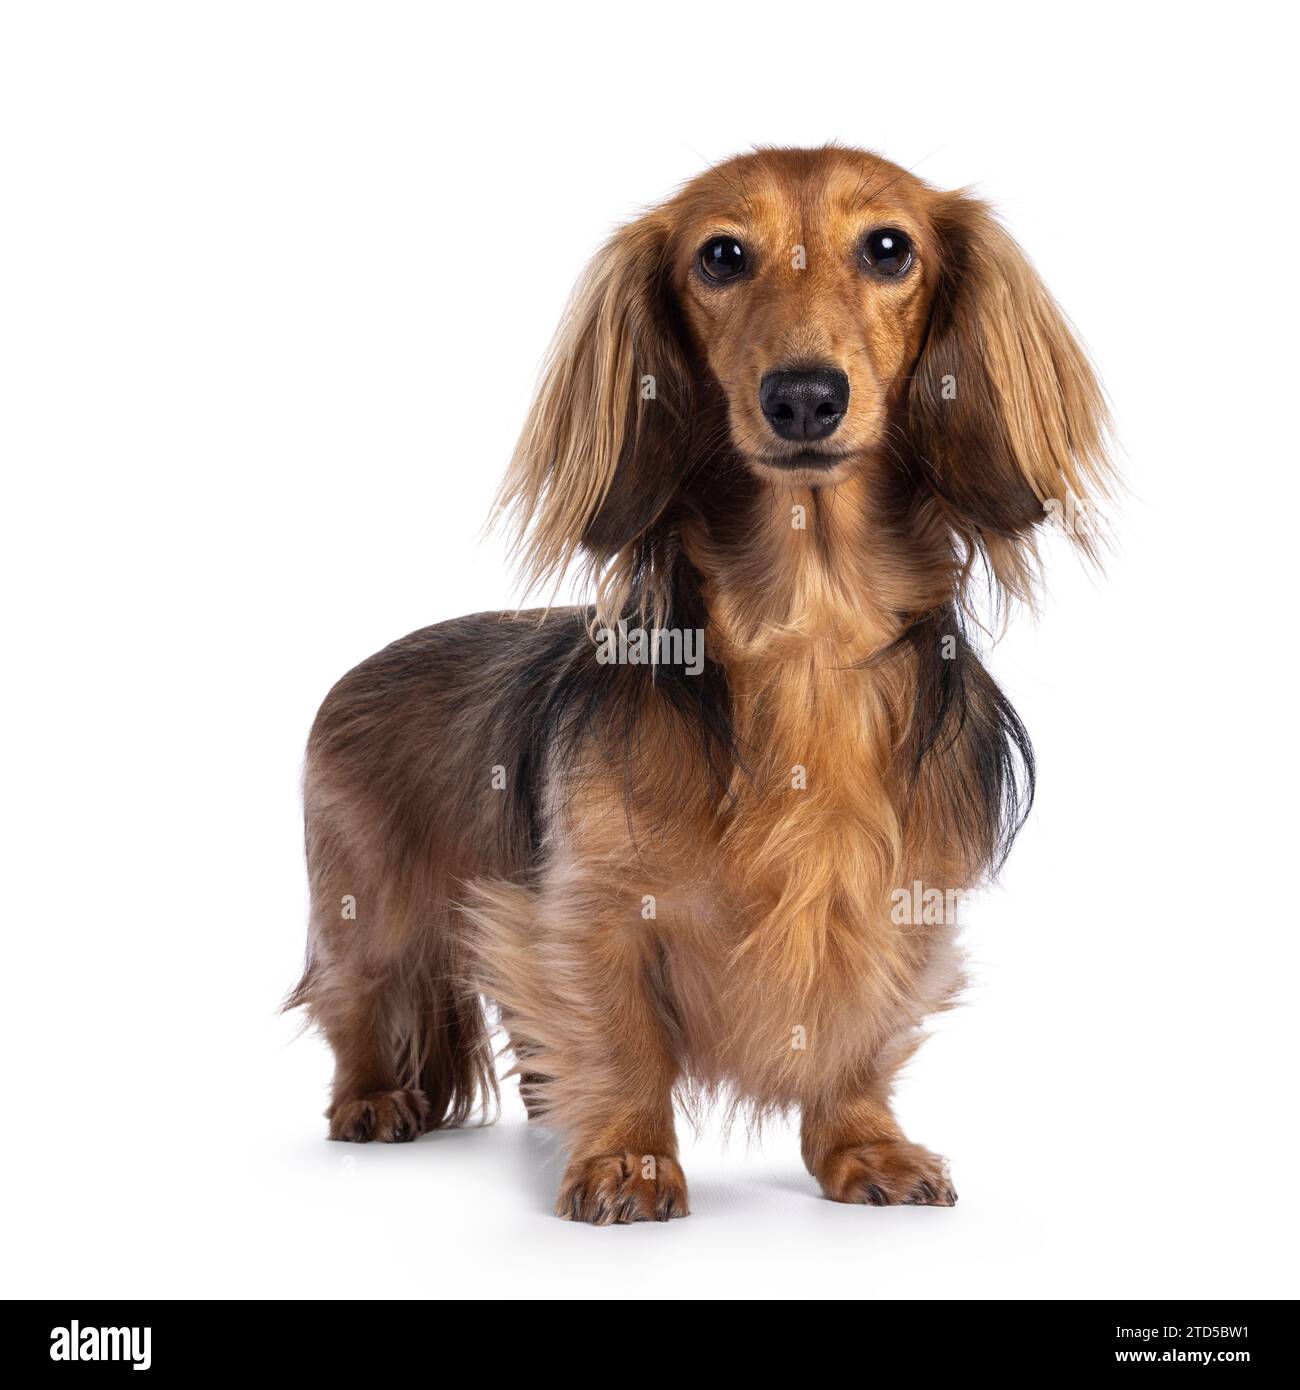 Cute smooth longhaired Dachshund dog aka teckel, standing up diagonal. Looking towards camera. Isolated on a white background. Stock Photo